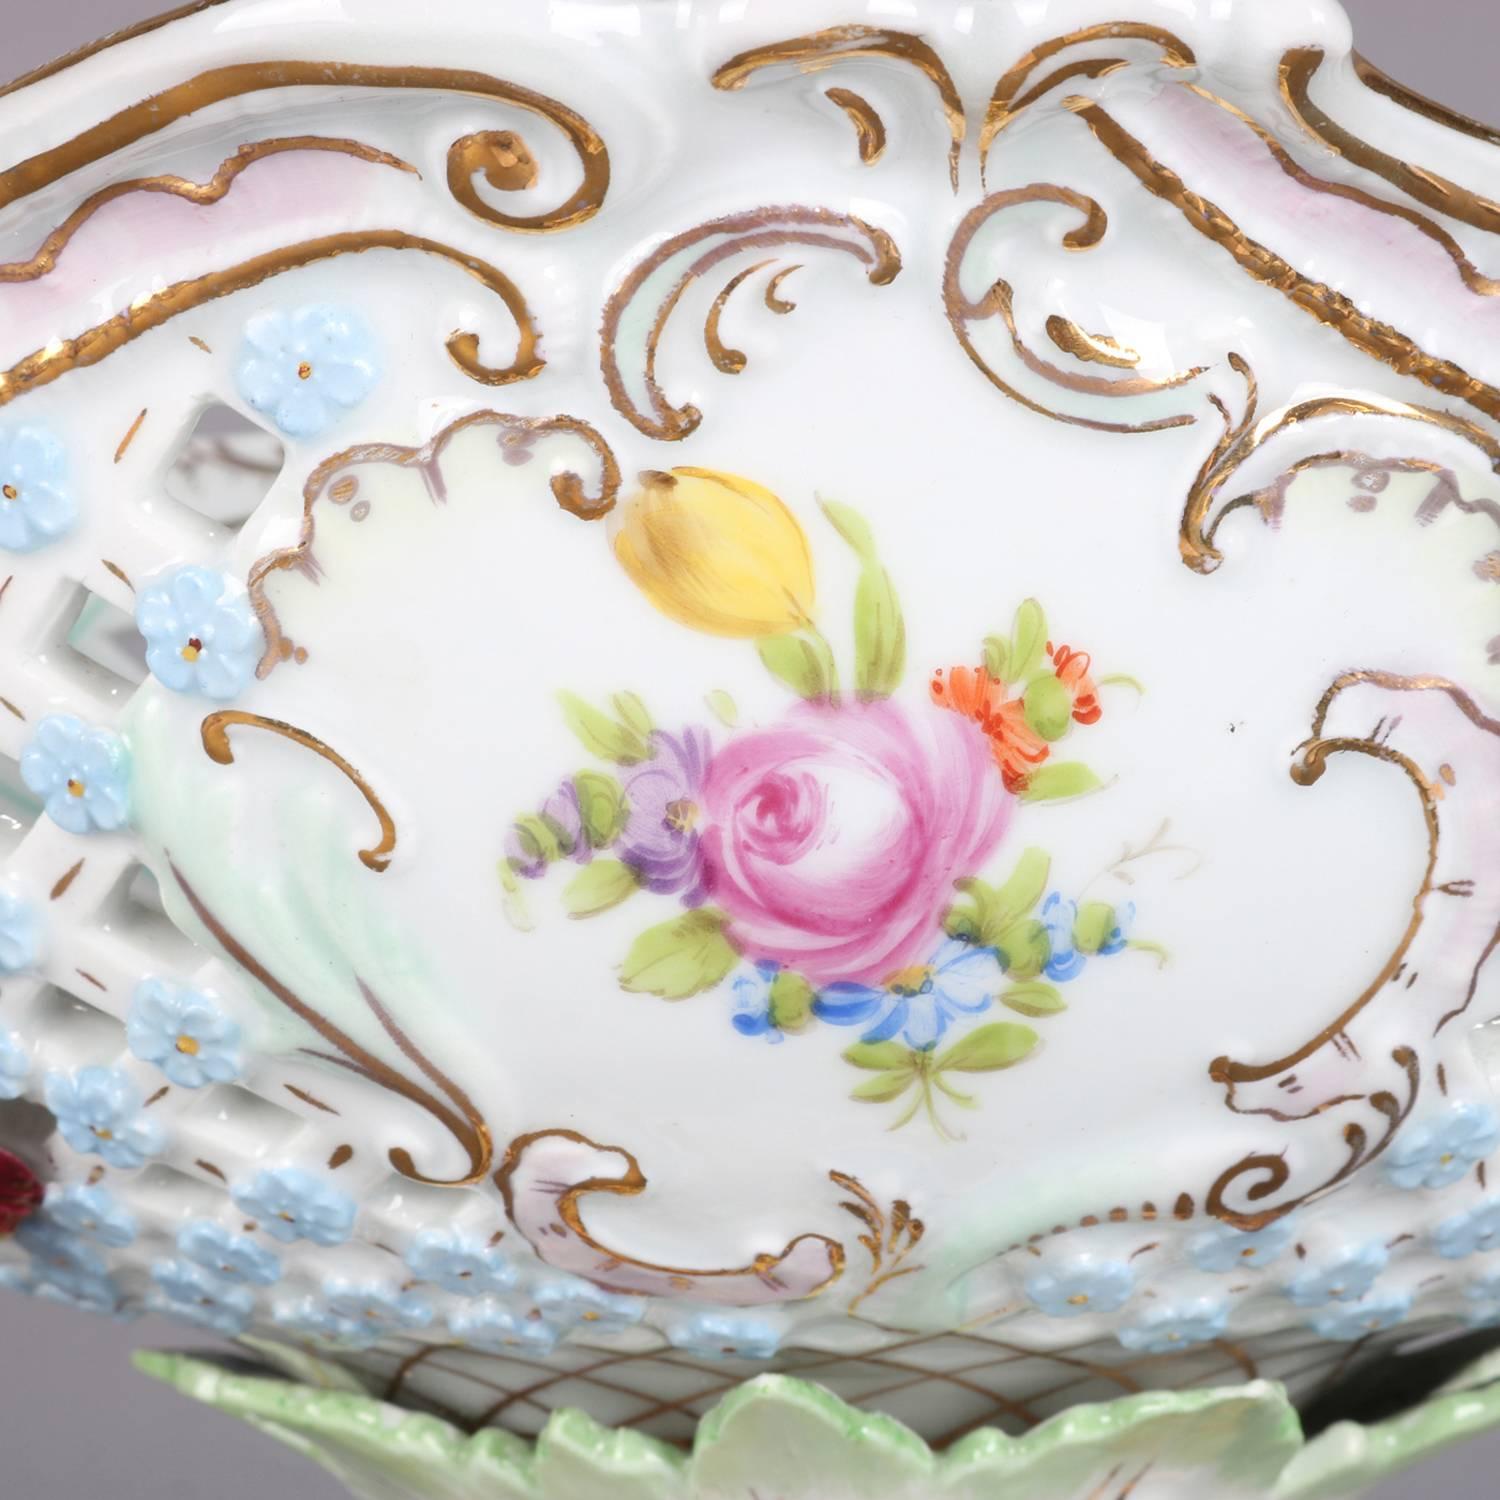 Oversized antique German Dresden porcelain figural hand-painted figural compote features pierced basket weave bowl with floral reserves and applied flowers raised on foliate form column reminiscent of a tree trunk with applied cherub and floral